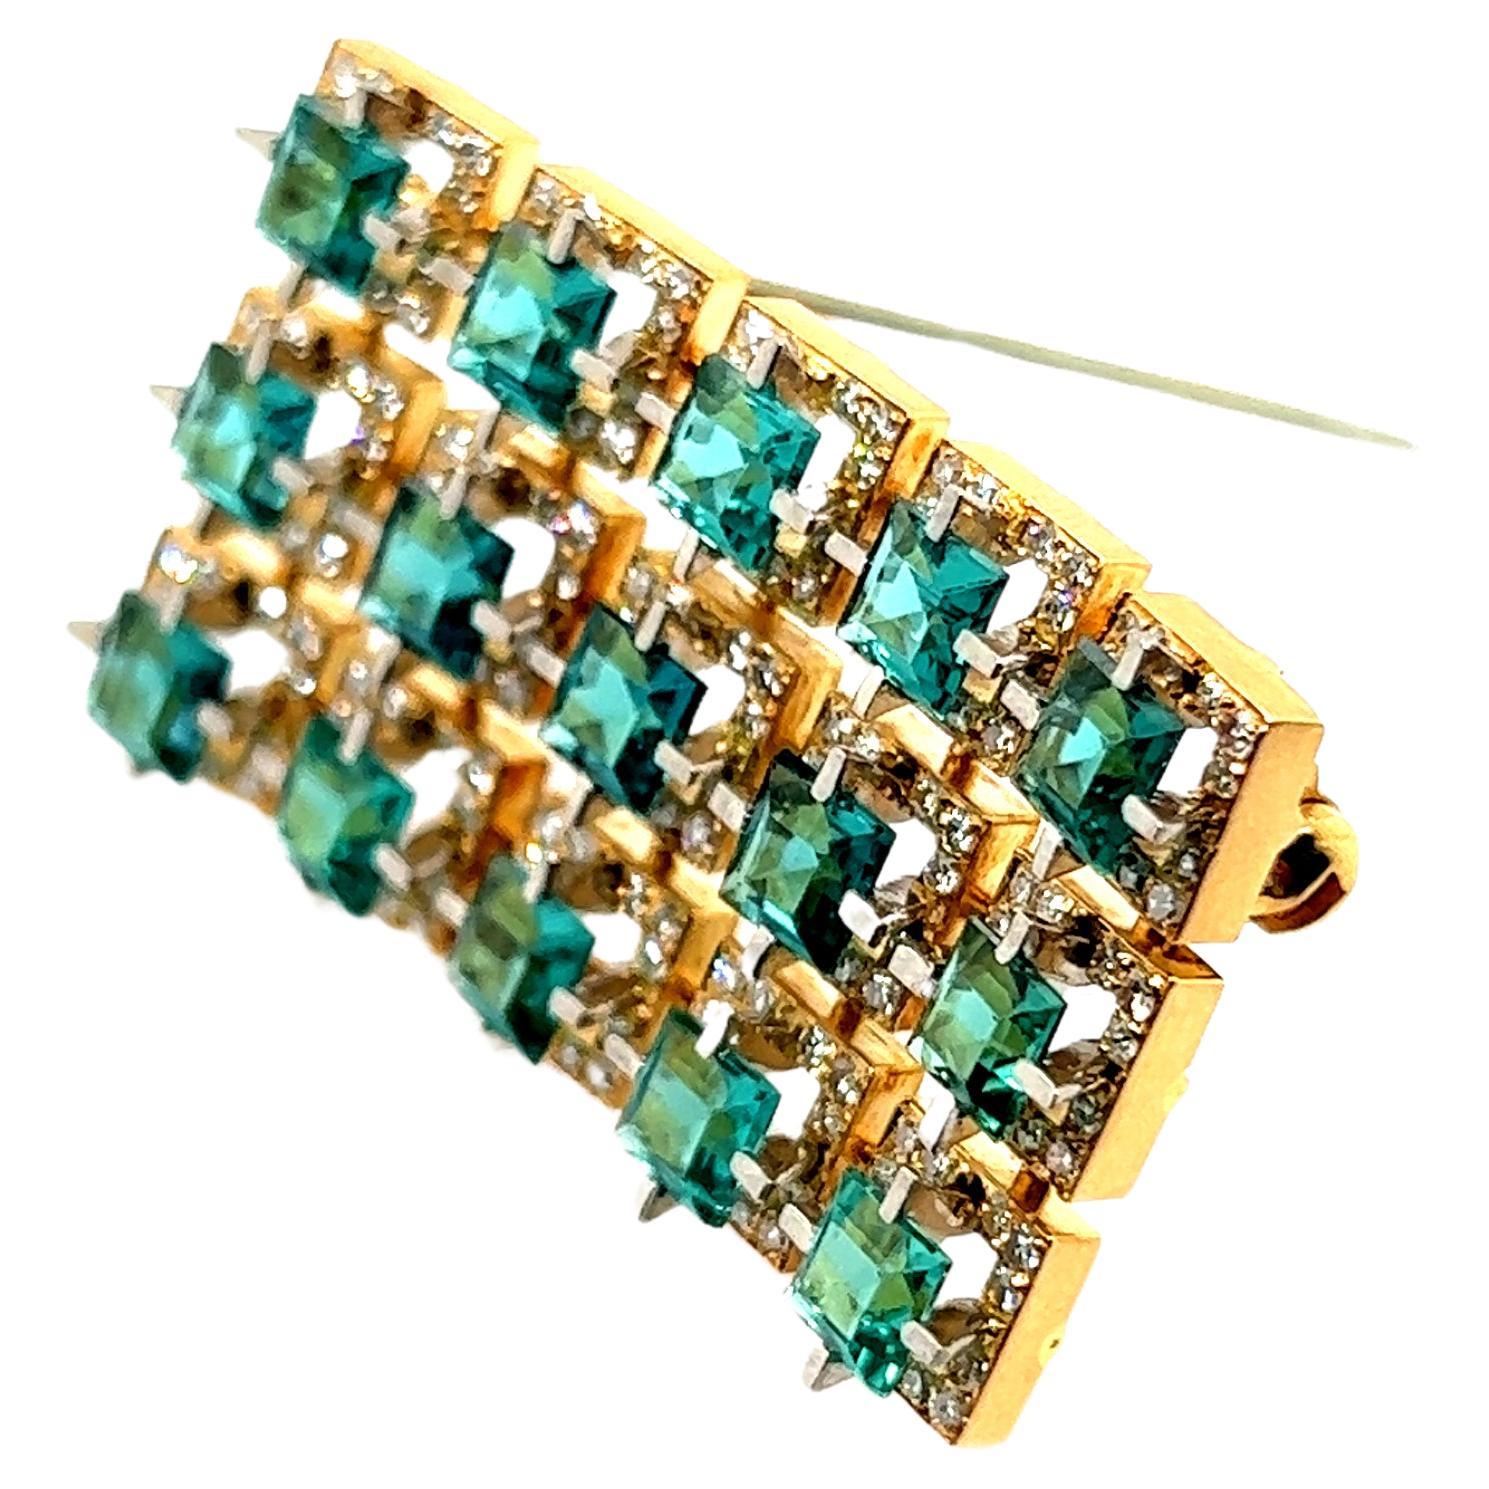 Introducing an exquisite geometric brooch with tourmaline and diamonds in 18 Karat yellow and white gold. Created by the Swiss Jewelry House Binder, it seamlessly blending tradition with contemporary designs. 

The brooch highlights 15 petite